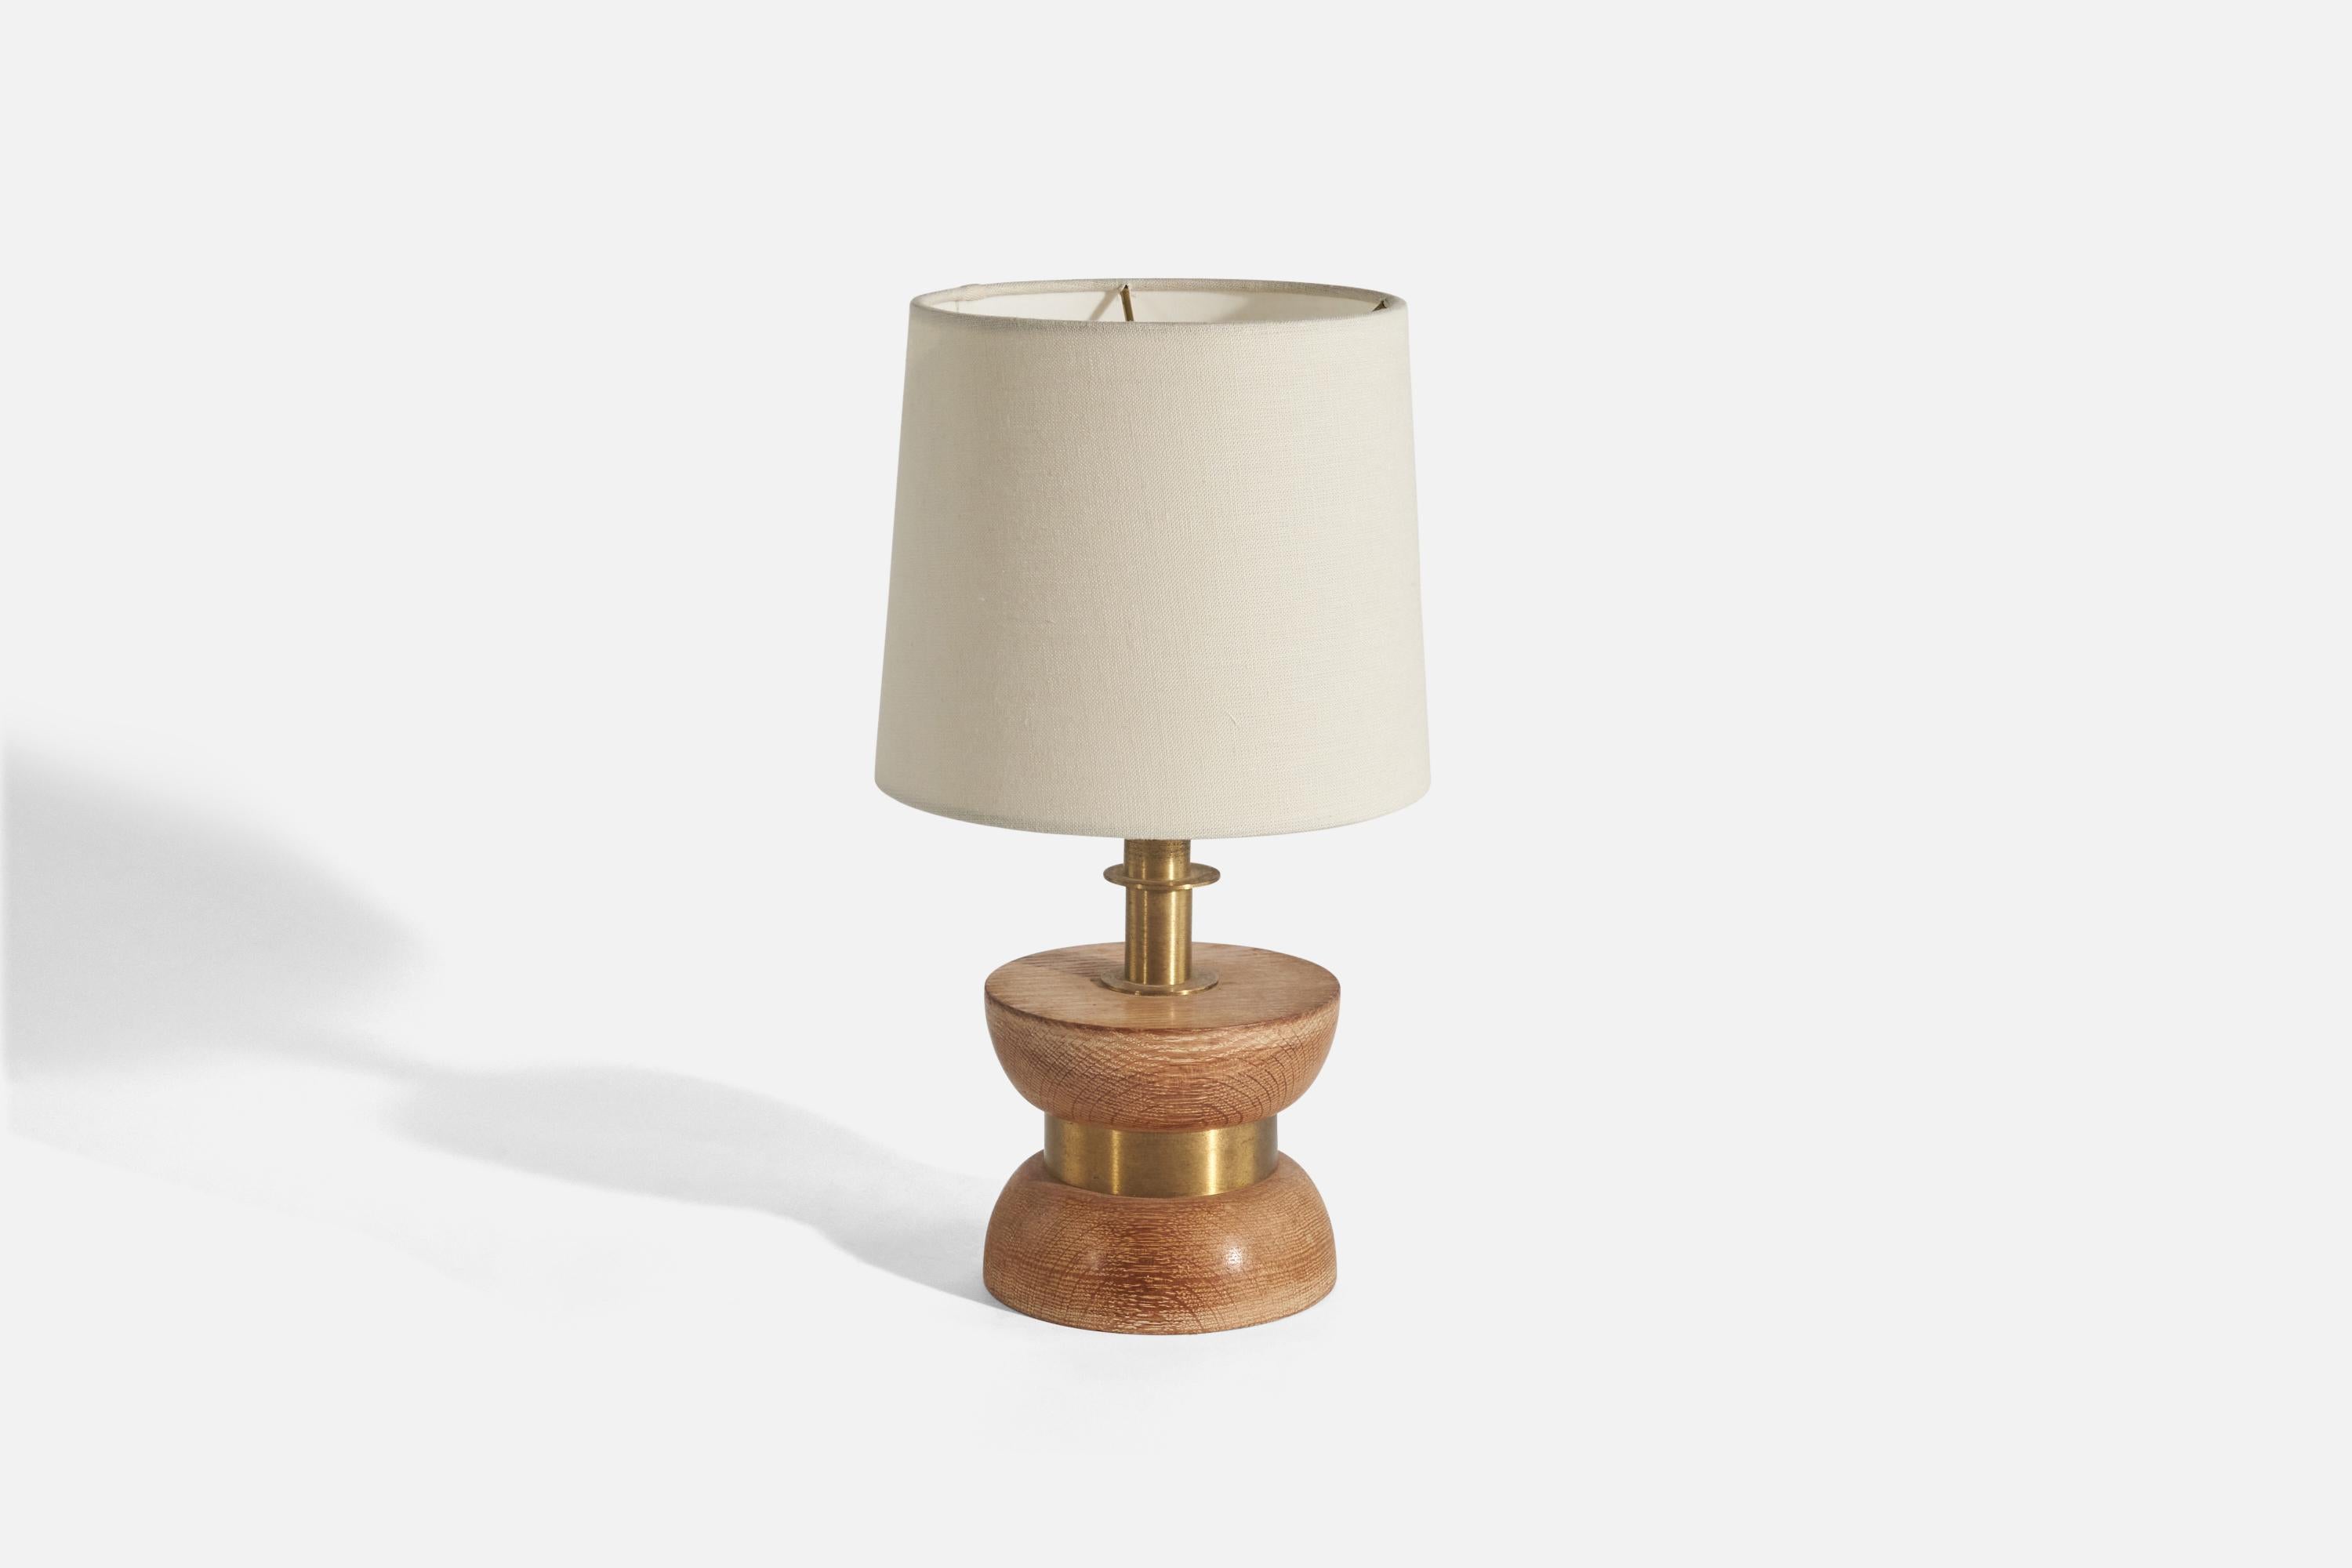 A brass and oak table lamp designed and produced in the United States, c. 1950s. 

Sold without Lampshade(s)
Dimensions of Lamp (inches) : 10.12 x 5.29 x 5.29 (Height x Width x Depth)
Dimensions of Shade (inches) : 7 x 8 x 7 (Top Diameter x Bottom